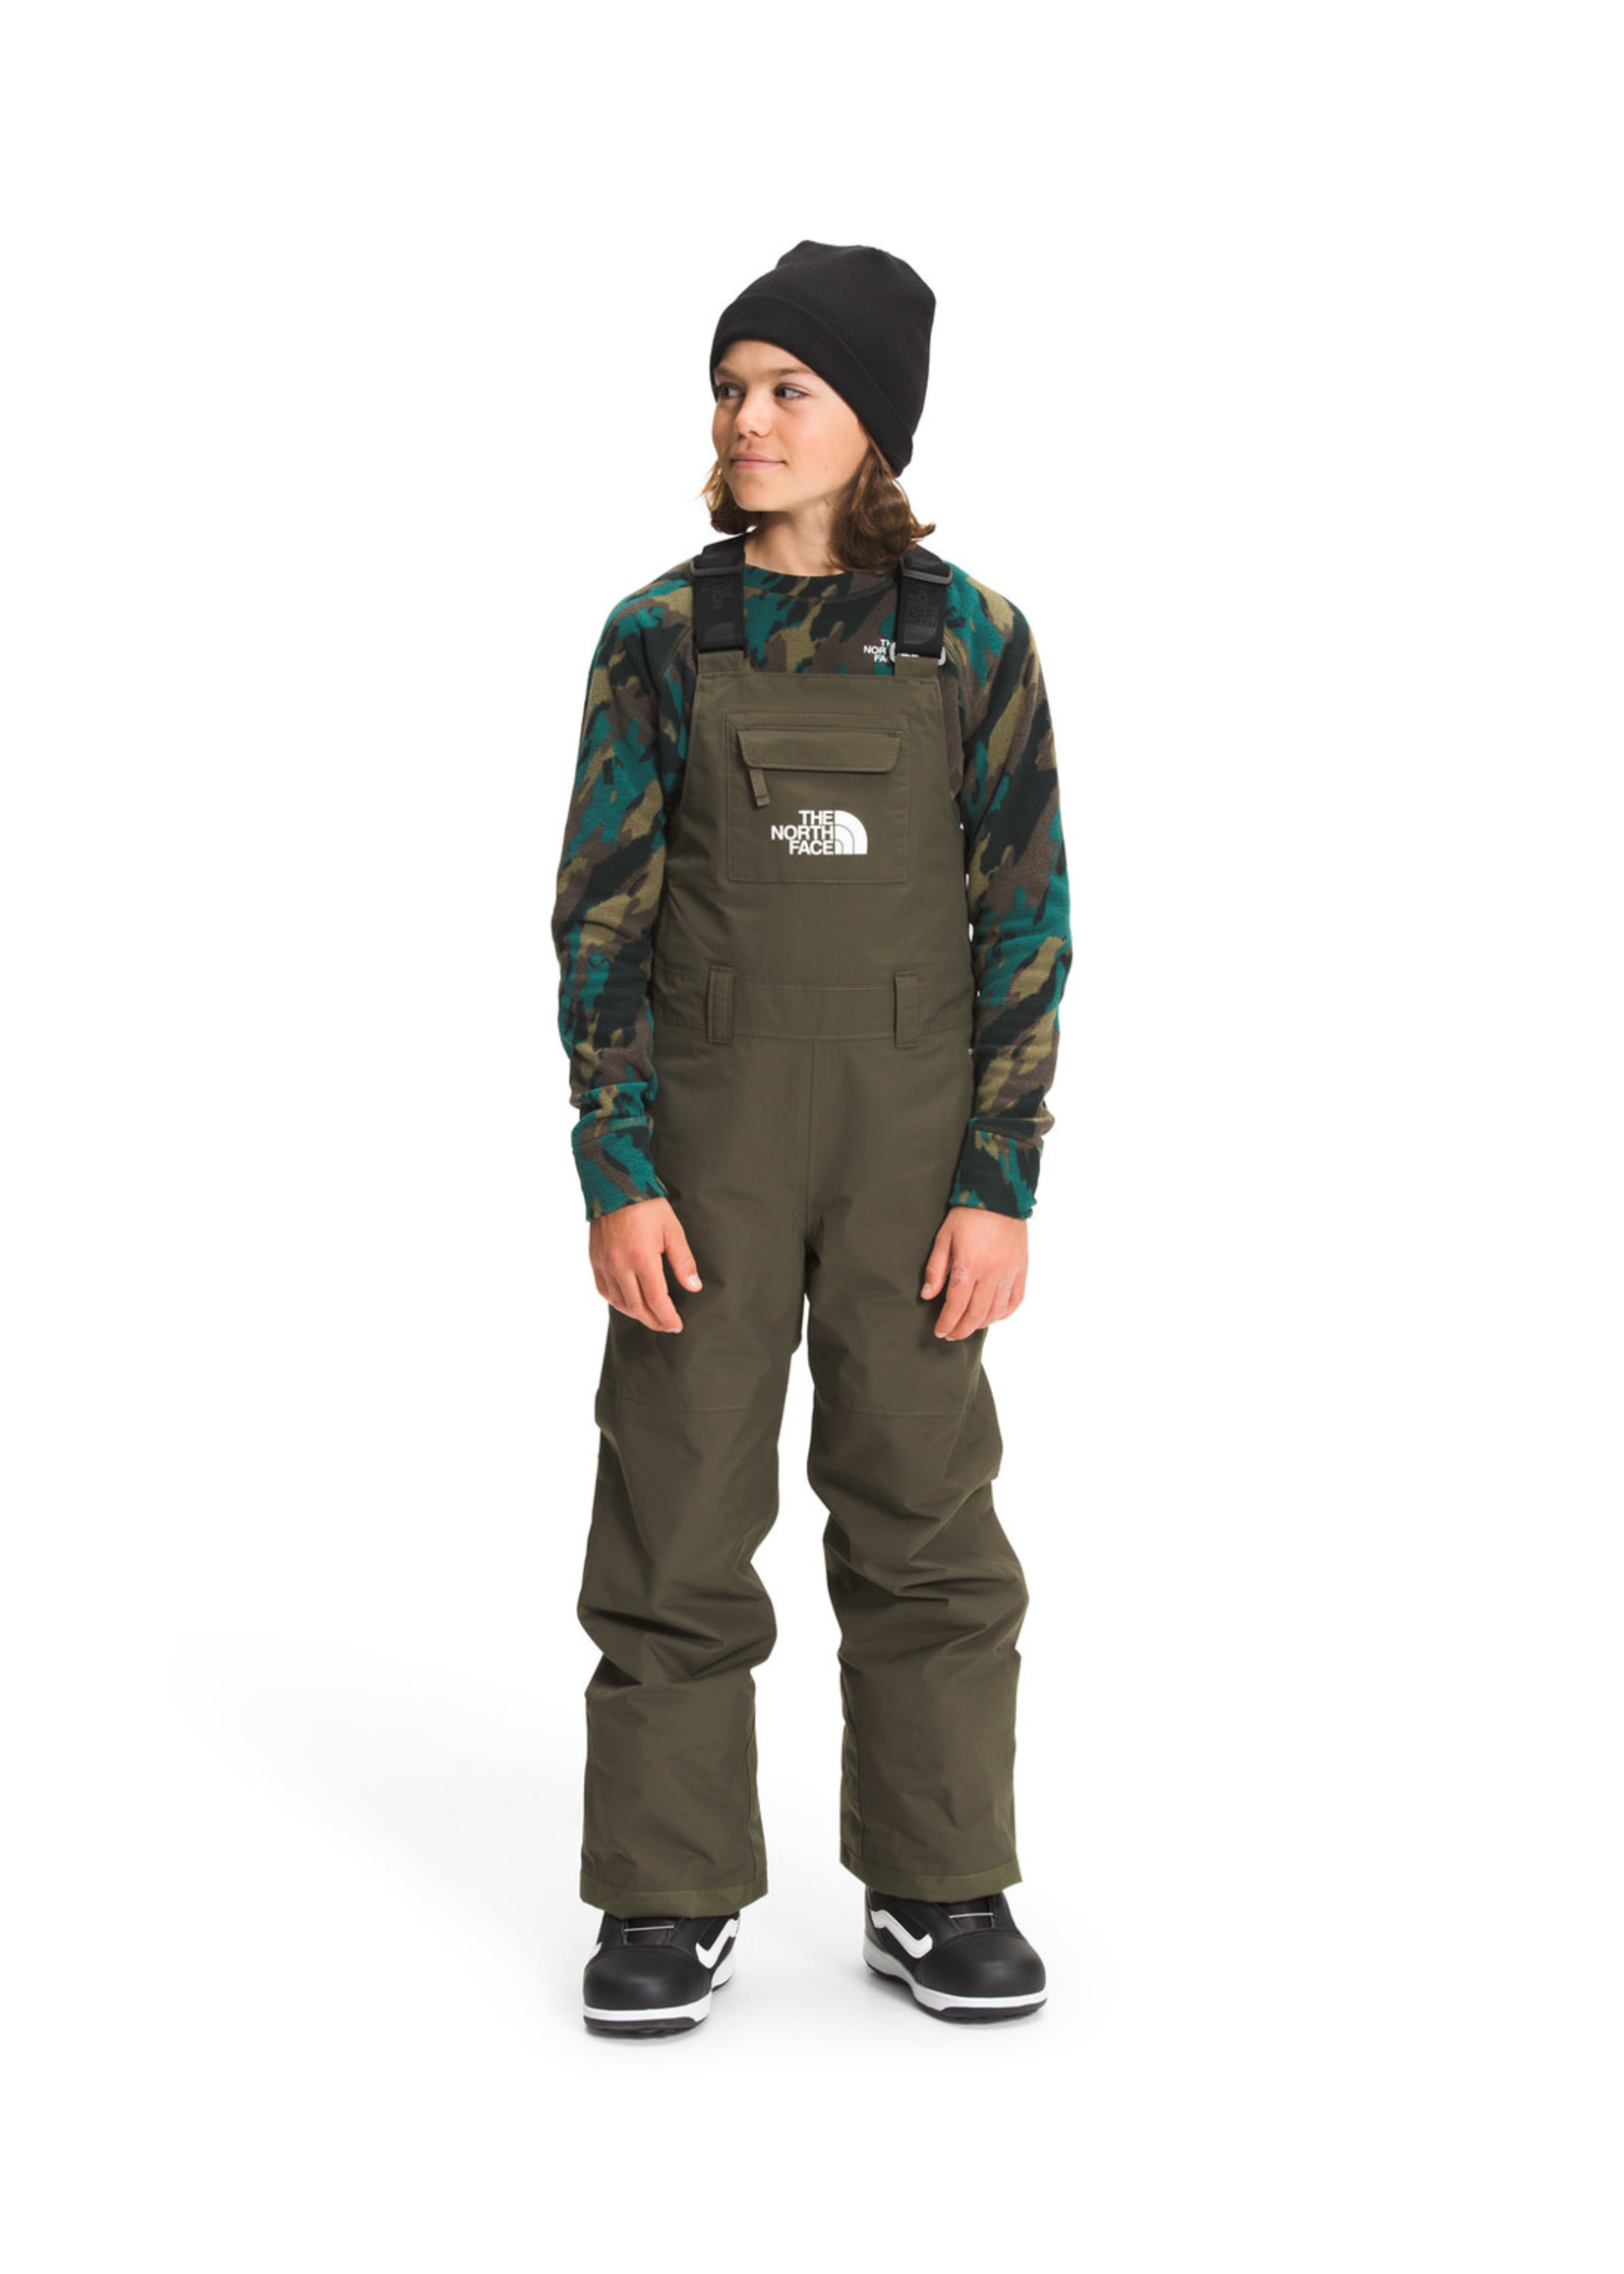 THE NORTH FACE Salopette isolée FREEDOM - enfants